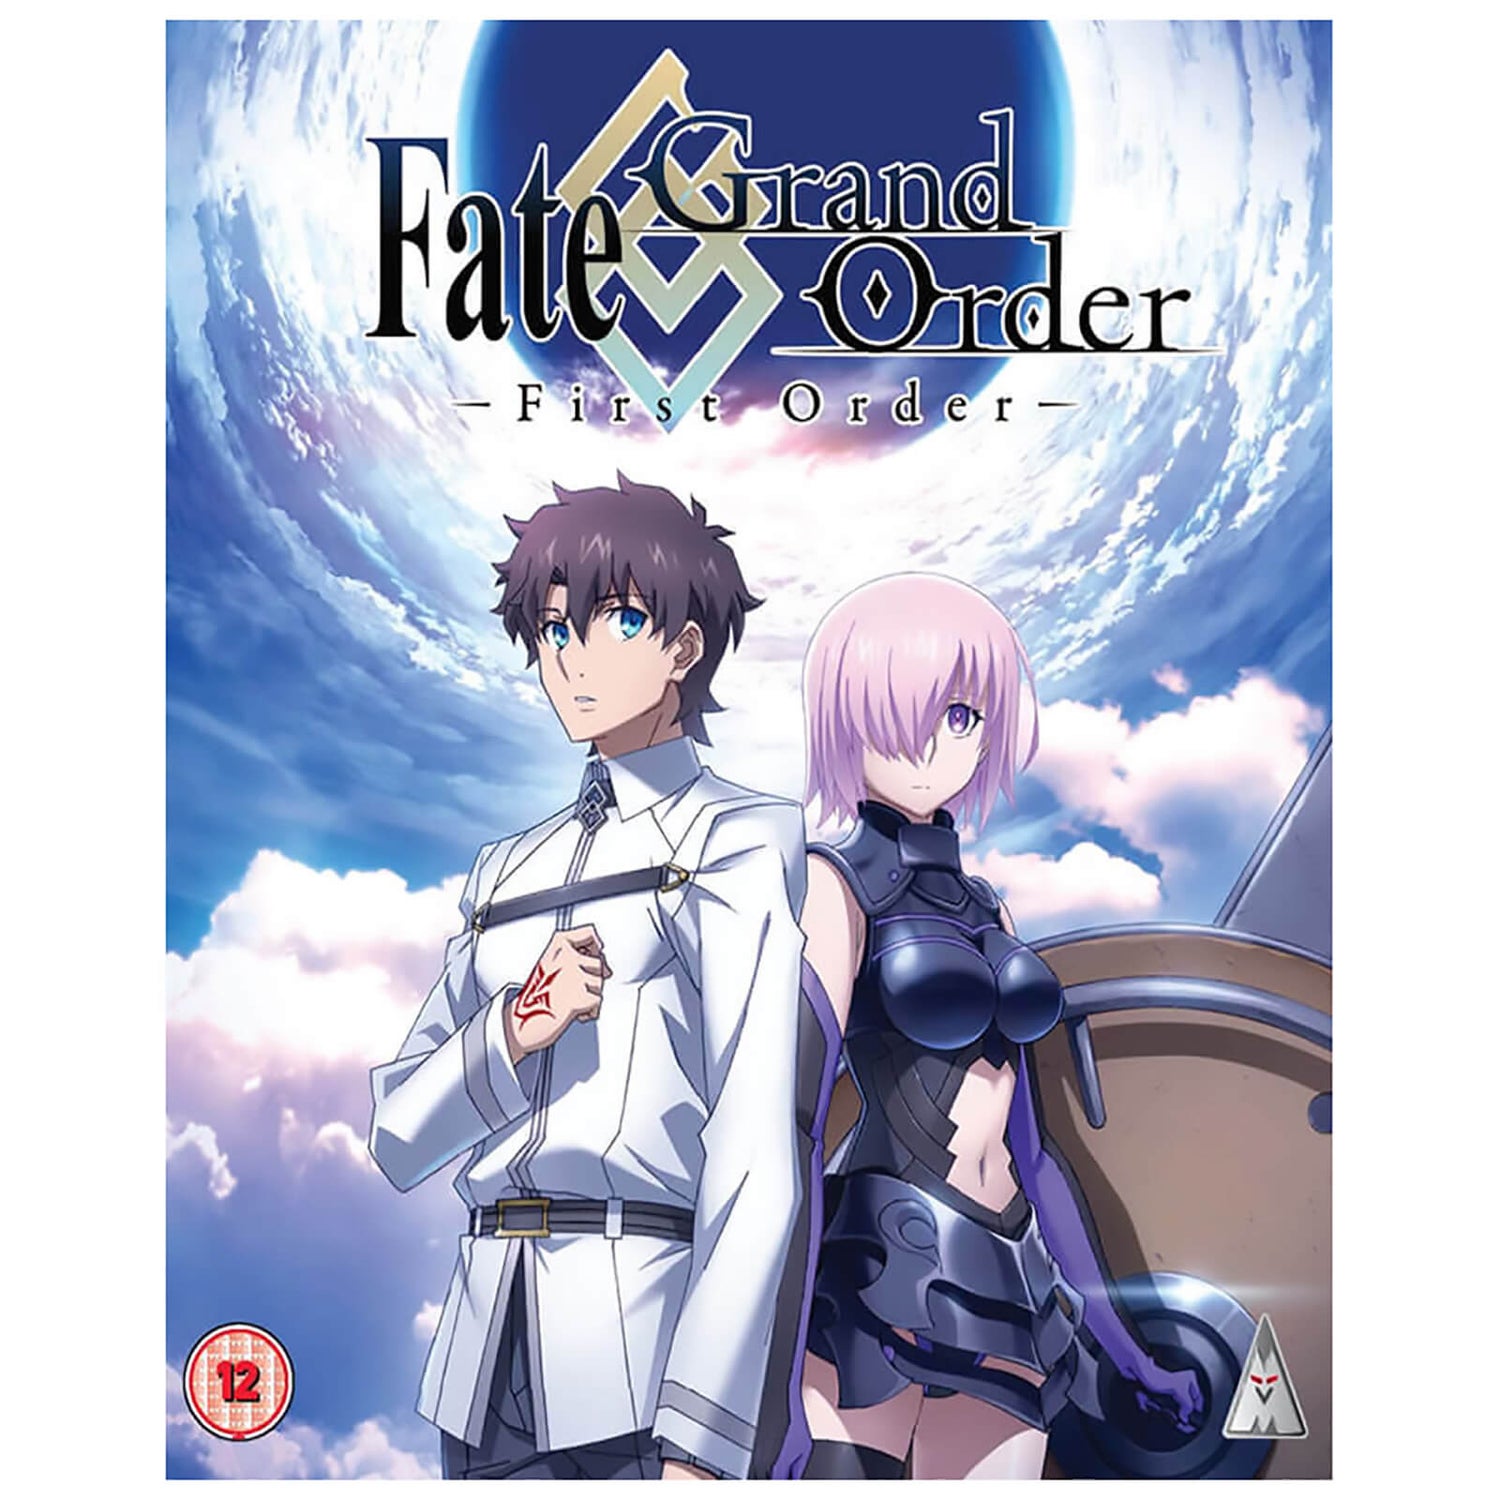 Fate Grand Order: First Order